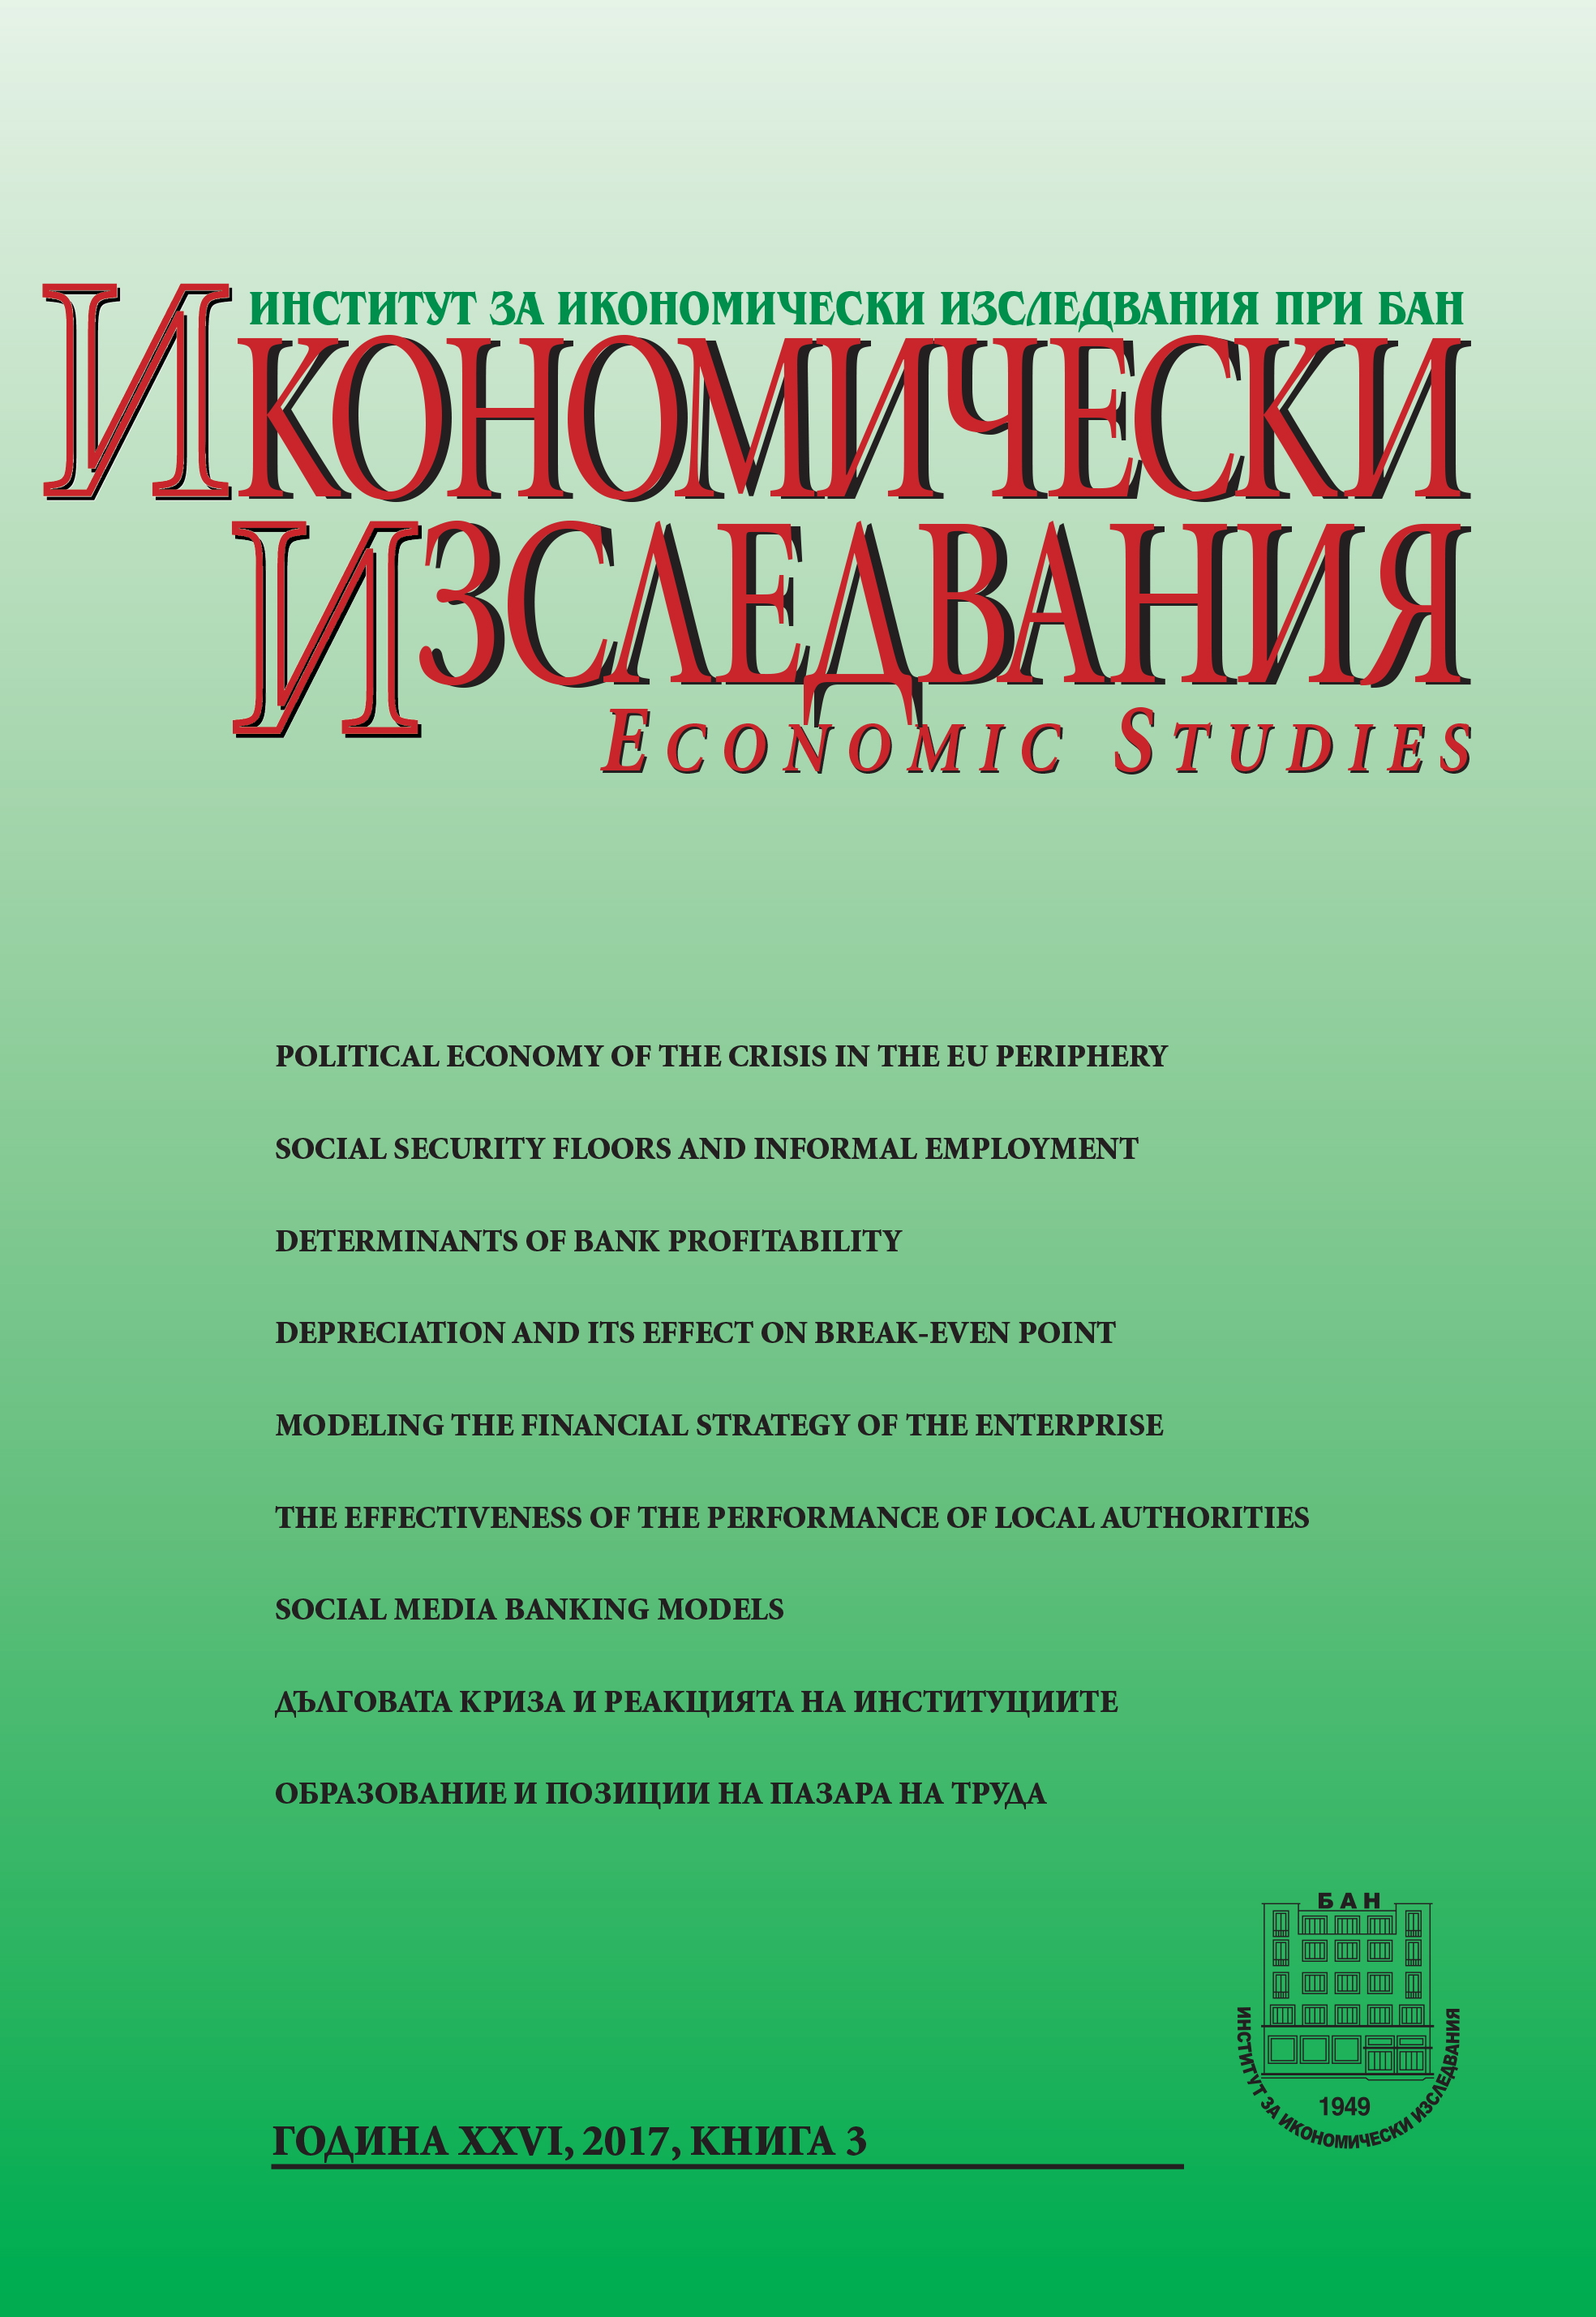 Determinants of Bank Profitability in the Republic of Macedonia – a Panel Data Analysis Cover Image